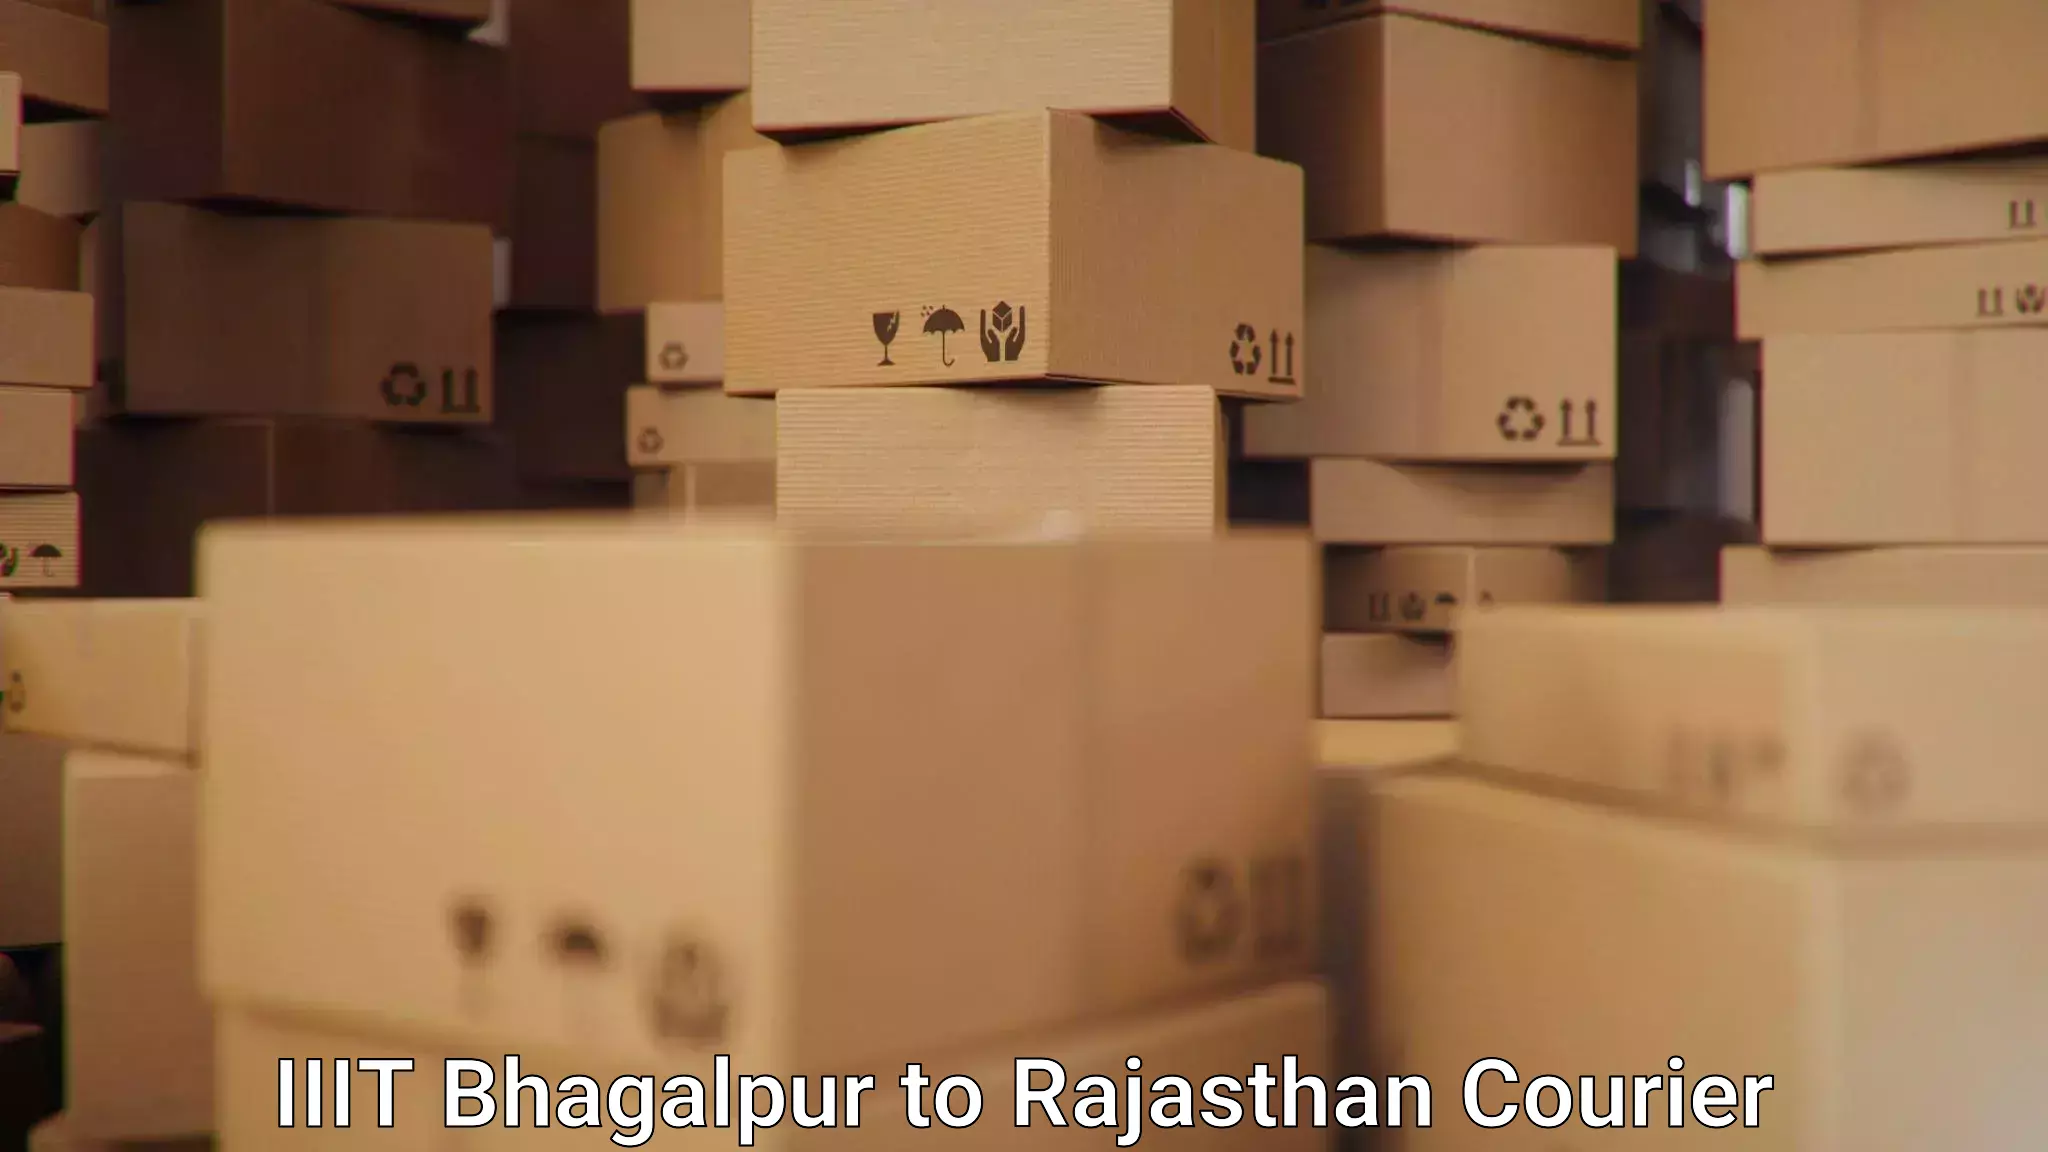 Reliable delivery network IIIT Bhagalpur to Shrimadhopur